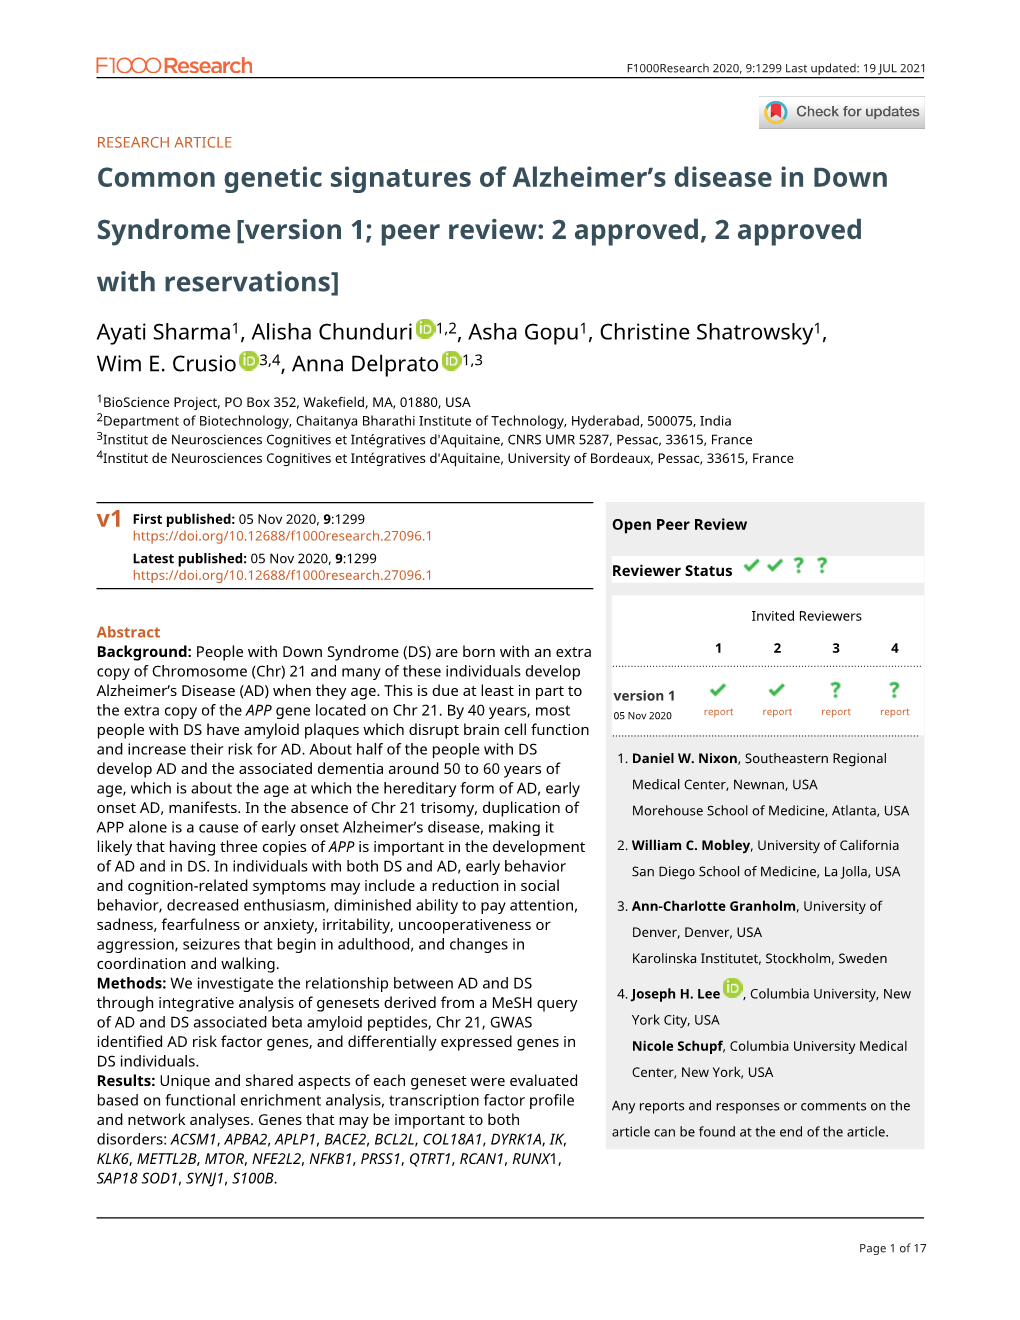 Common Genetic Signatures of Alzheimer's Disease in Down